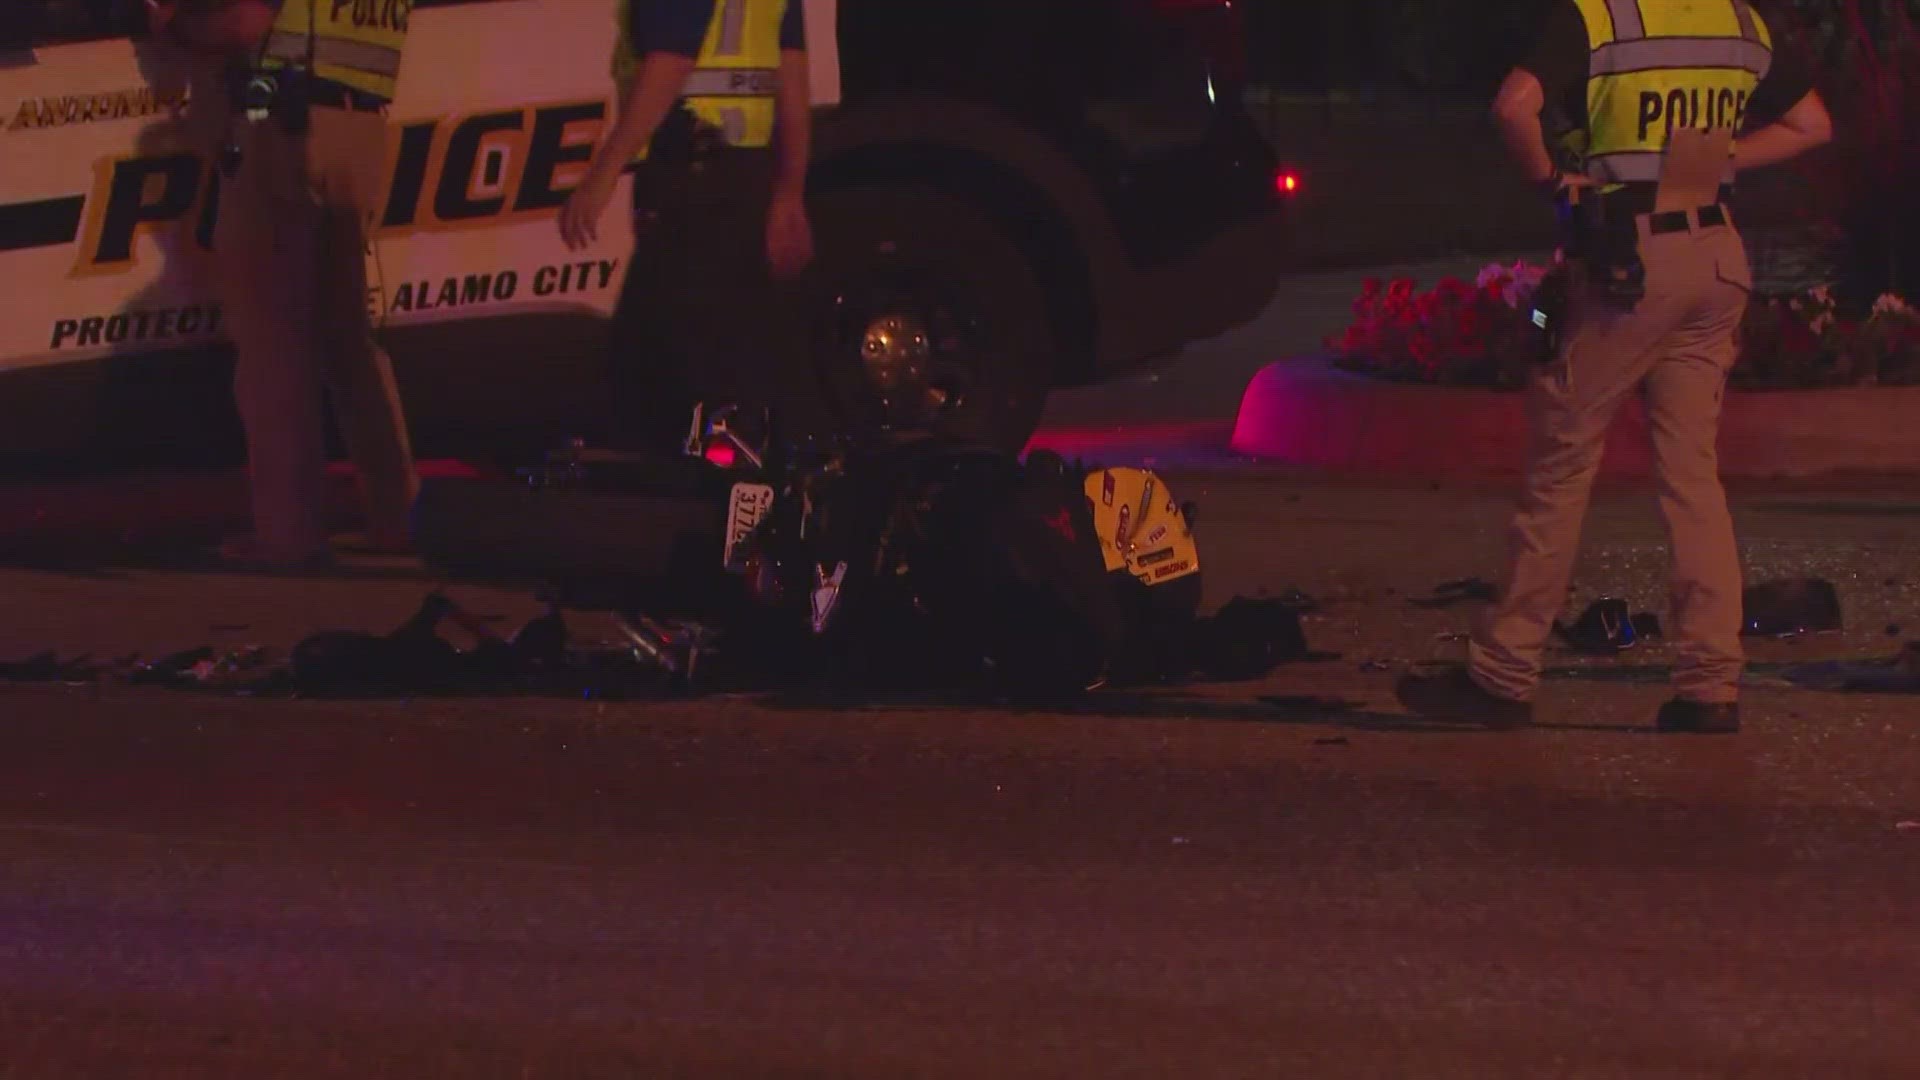 Man dead after crashing motorcycle into car in front of apartment complex